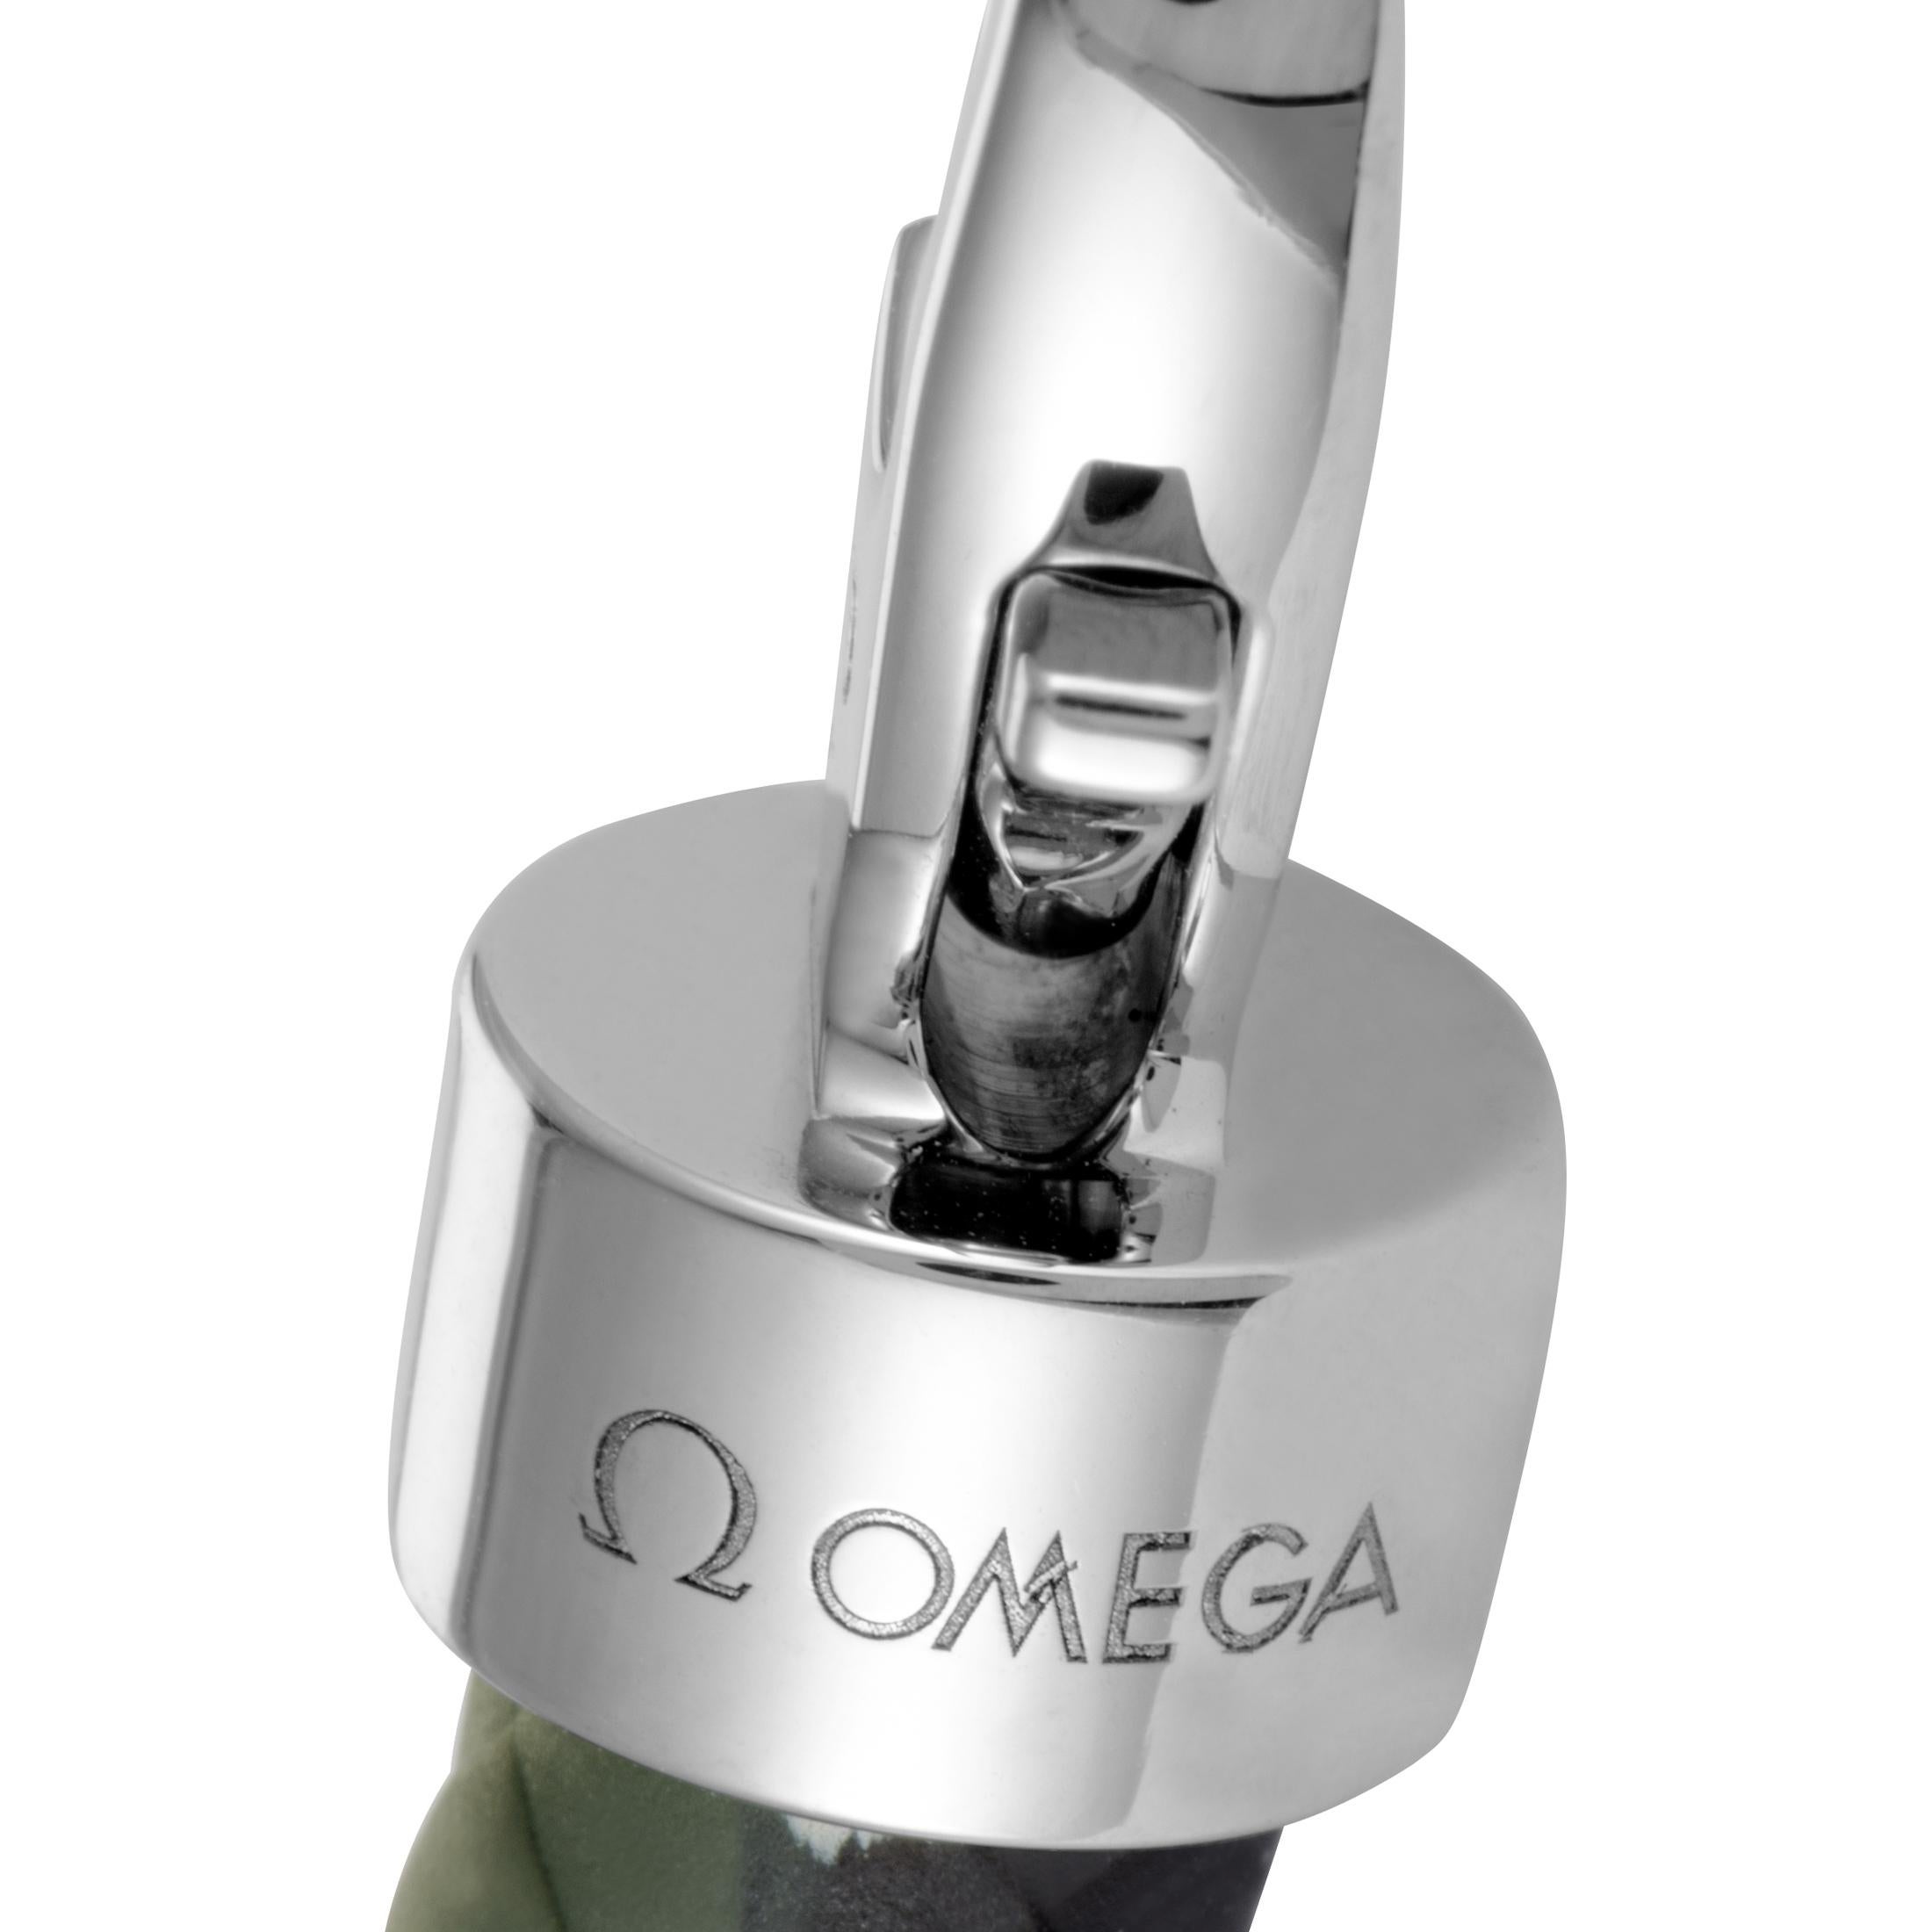 The Omega “Aqua Sailing” bracelet is made out of stainless steel and green camo rubber and features lobster claw closure. The bracelet measures 7.50” in length and weighs 24.7 grams.
 
 Offered in brand new condition, this jewelry piece includes a